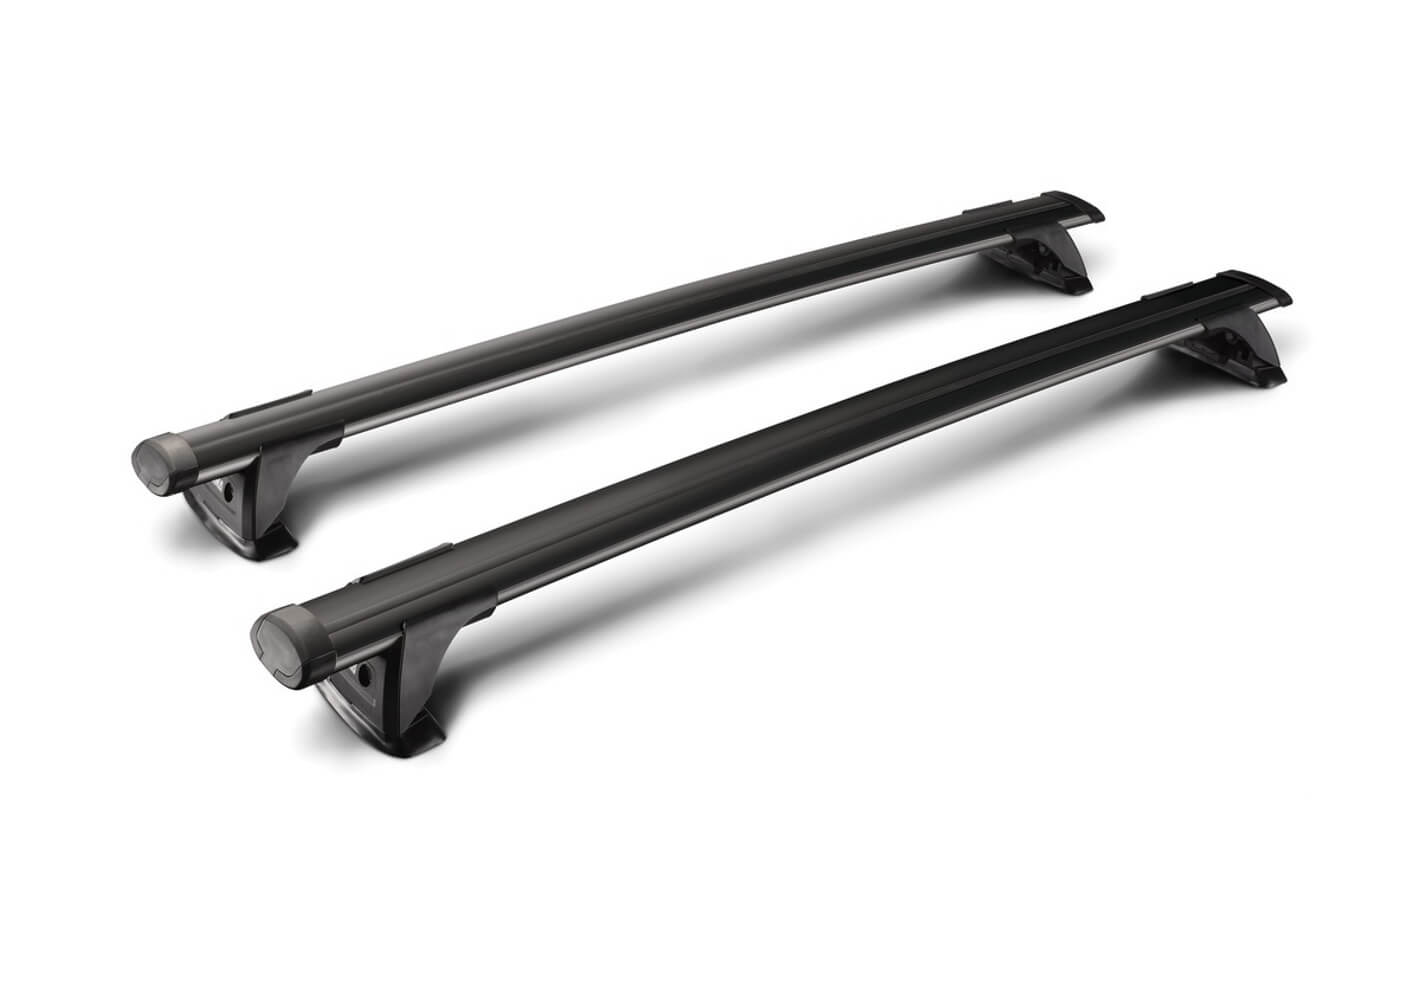 Audi Q5 (2008 to 2017):Yakima roof bars package - S17B black bars with K666 kit